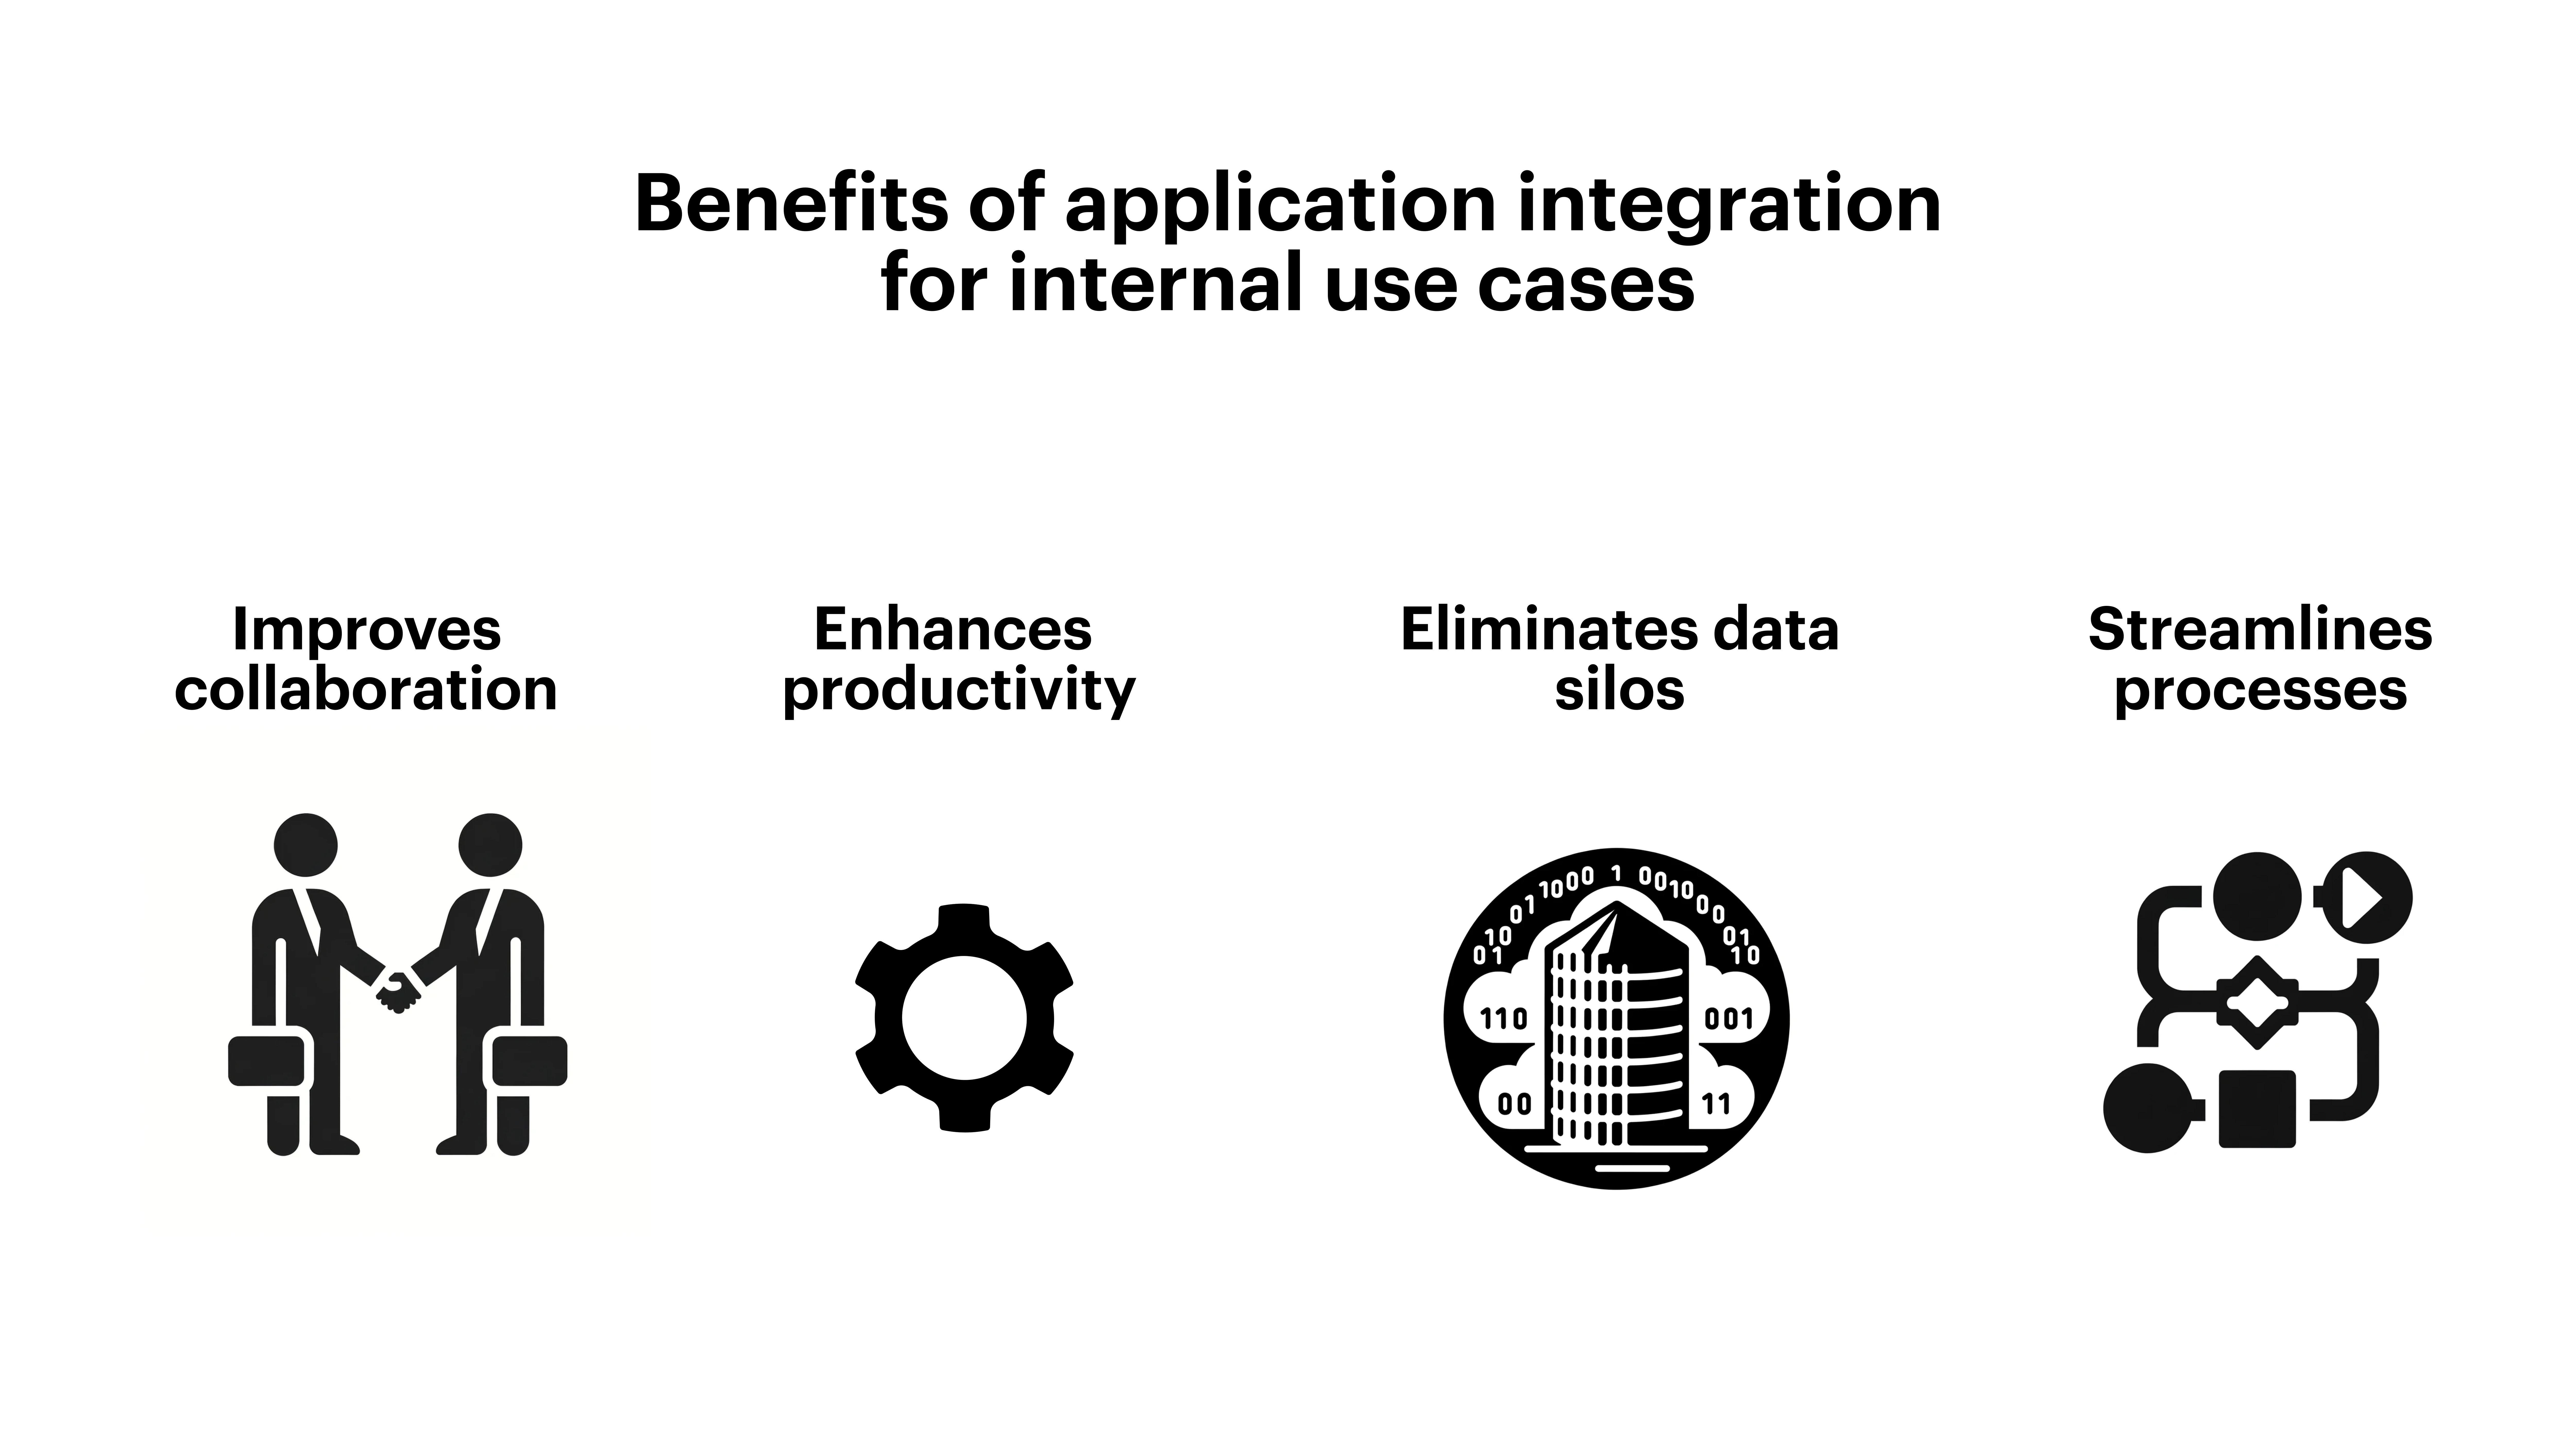 Benefits of application integration for internal use cases